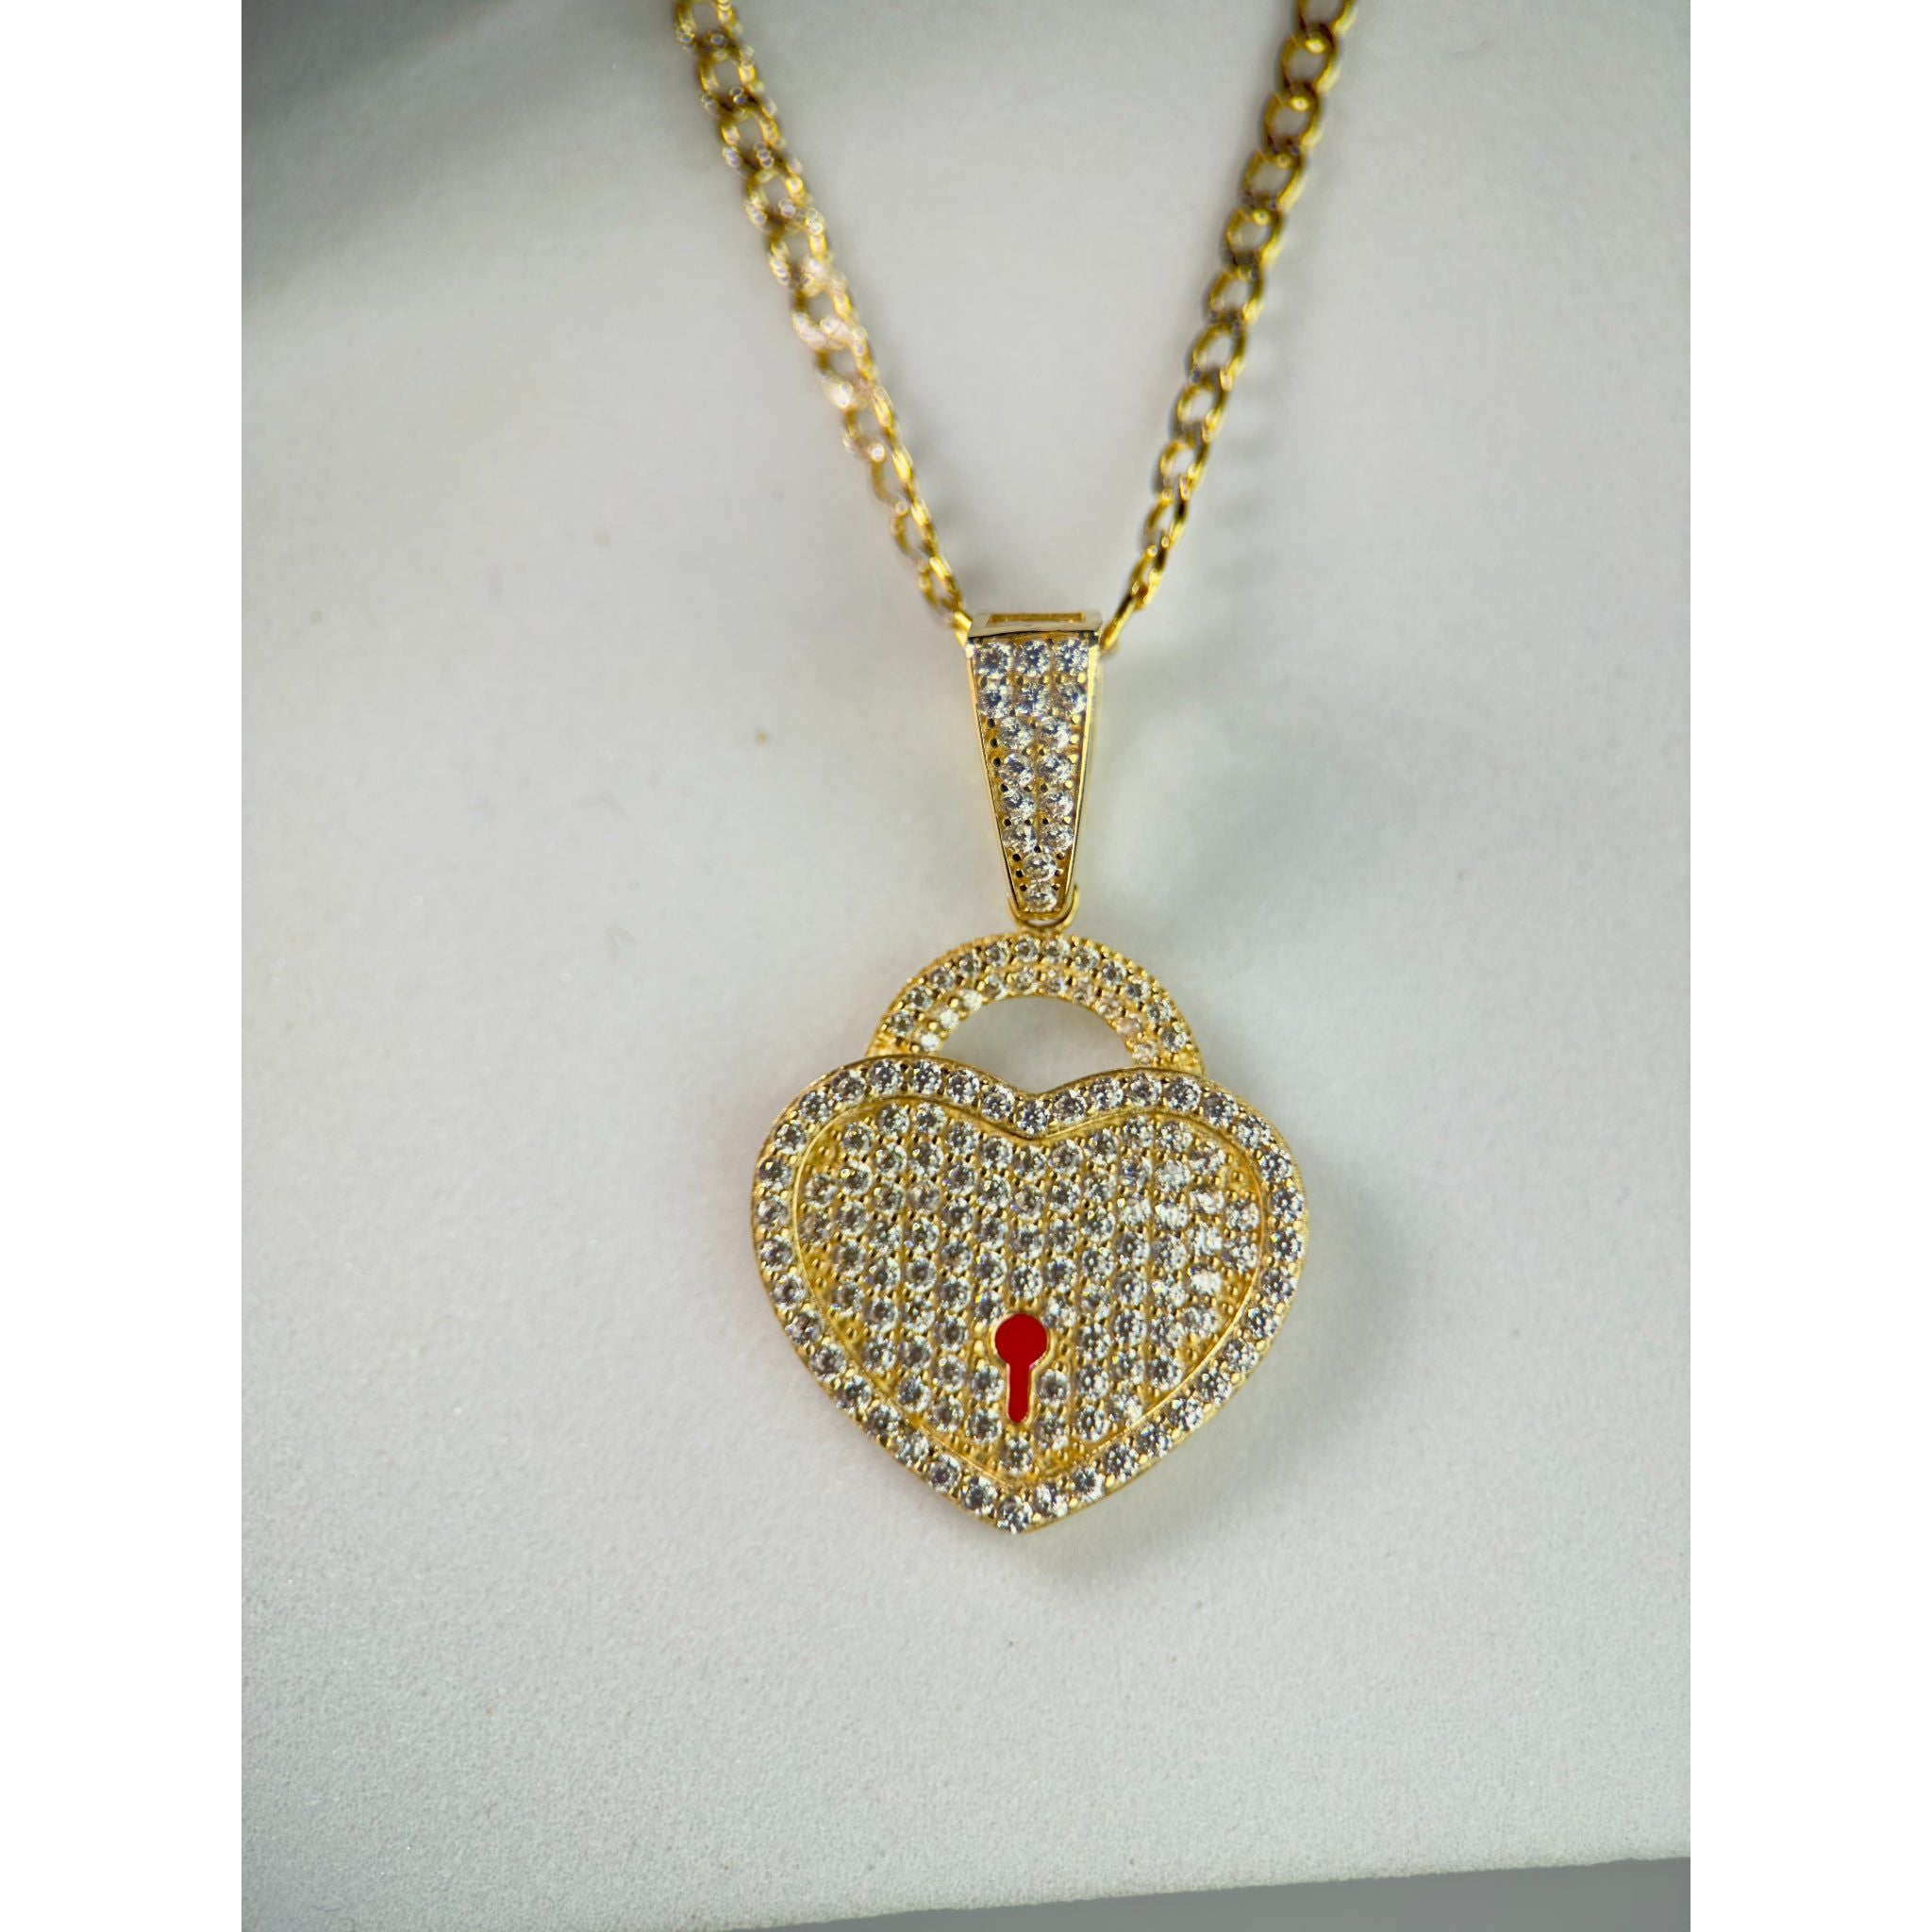 DR1925 - 14K Yellow Gold - Lab Created Stones - Gold Chain & Charm - 14K Gold Heart